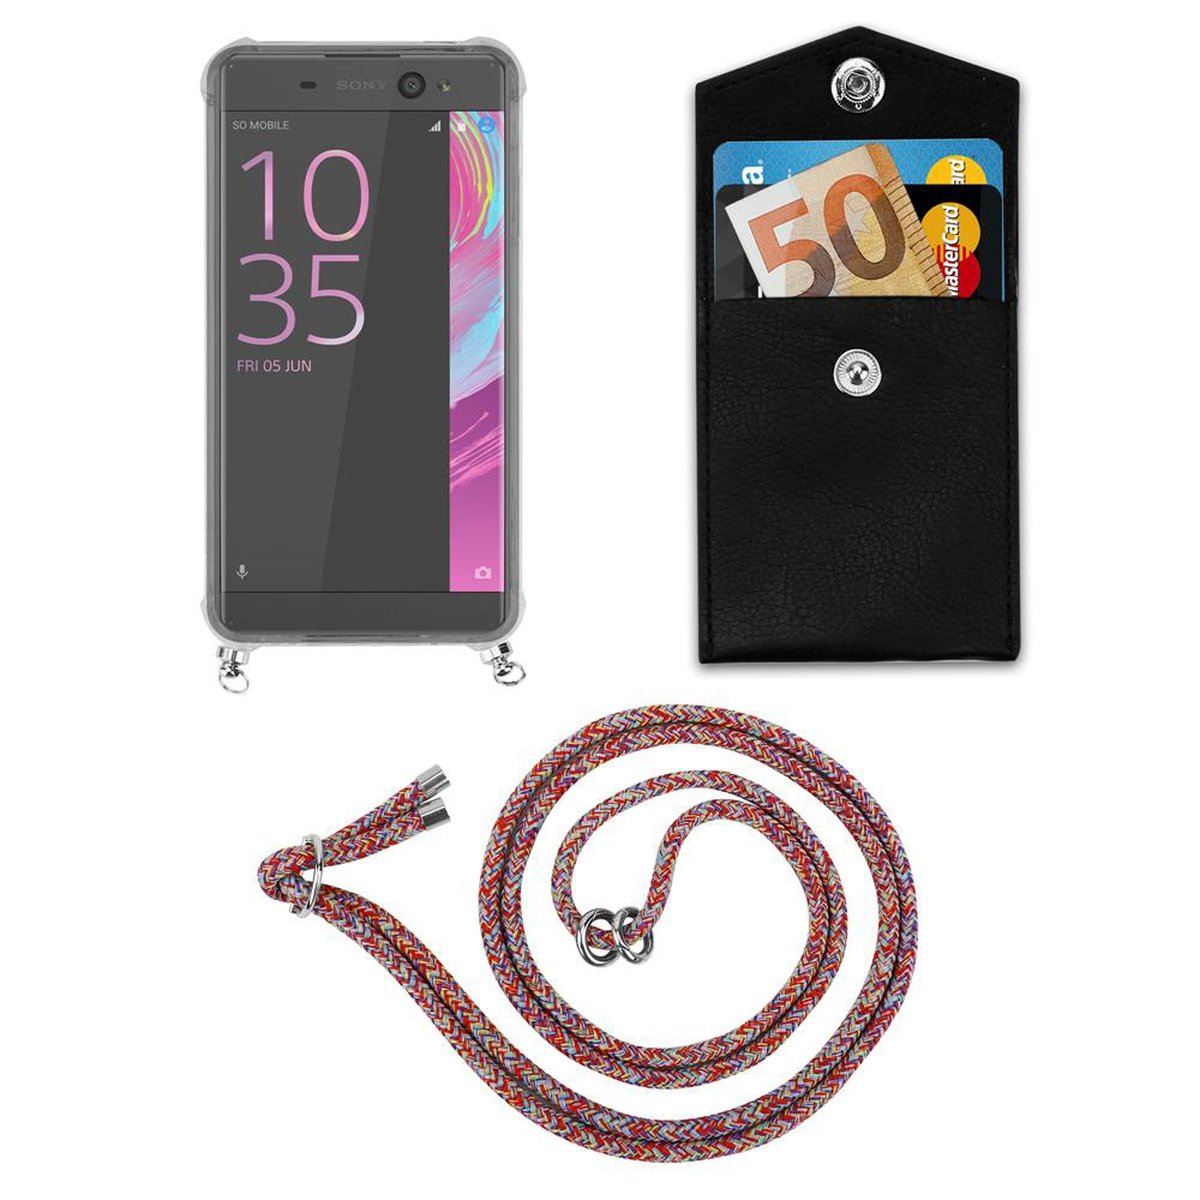 CADORABO Handy Kette abnehmbarer mit XA, Backcover, PARROT Hülle, Kordel COLORFUL Sony, Ringen, Band Xperia und Silber